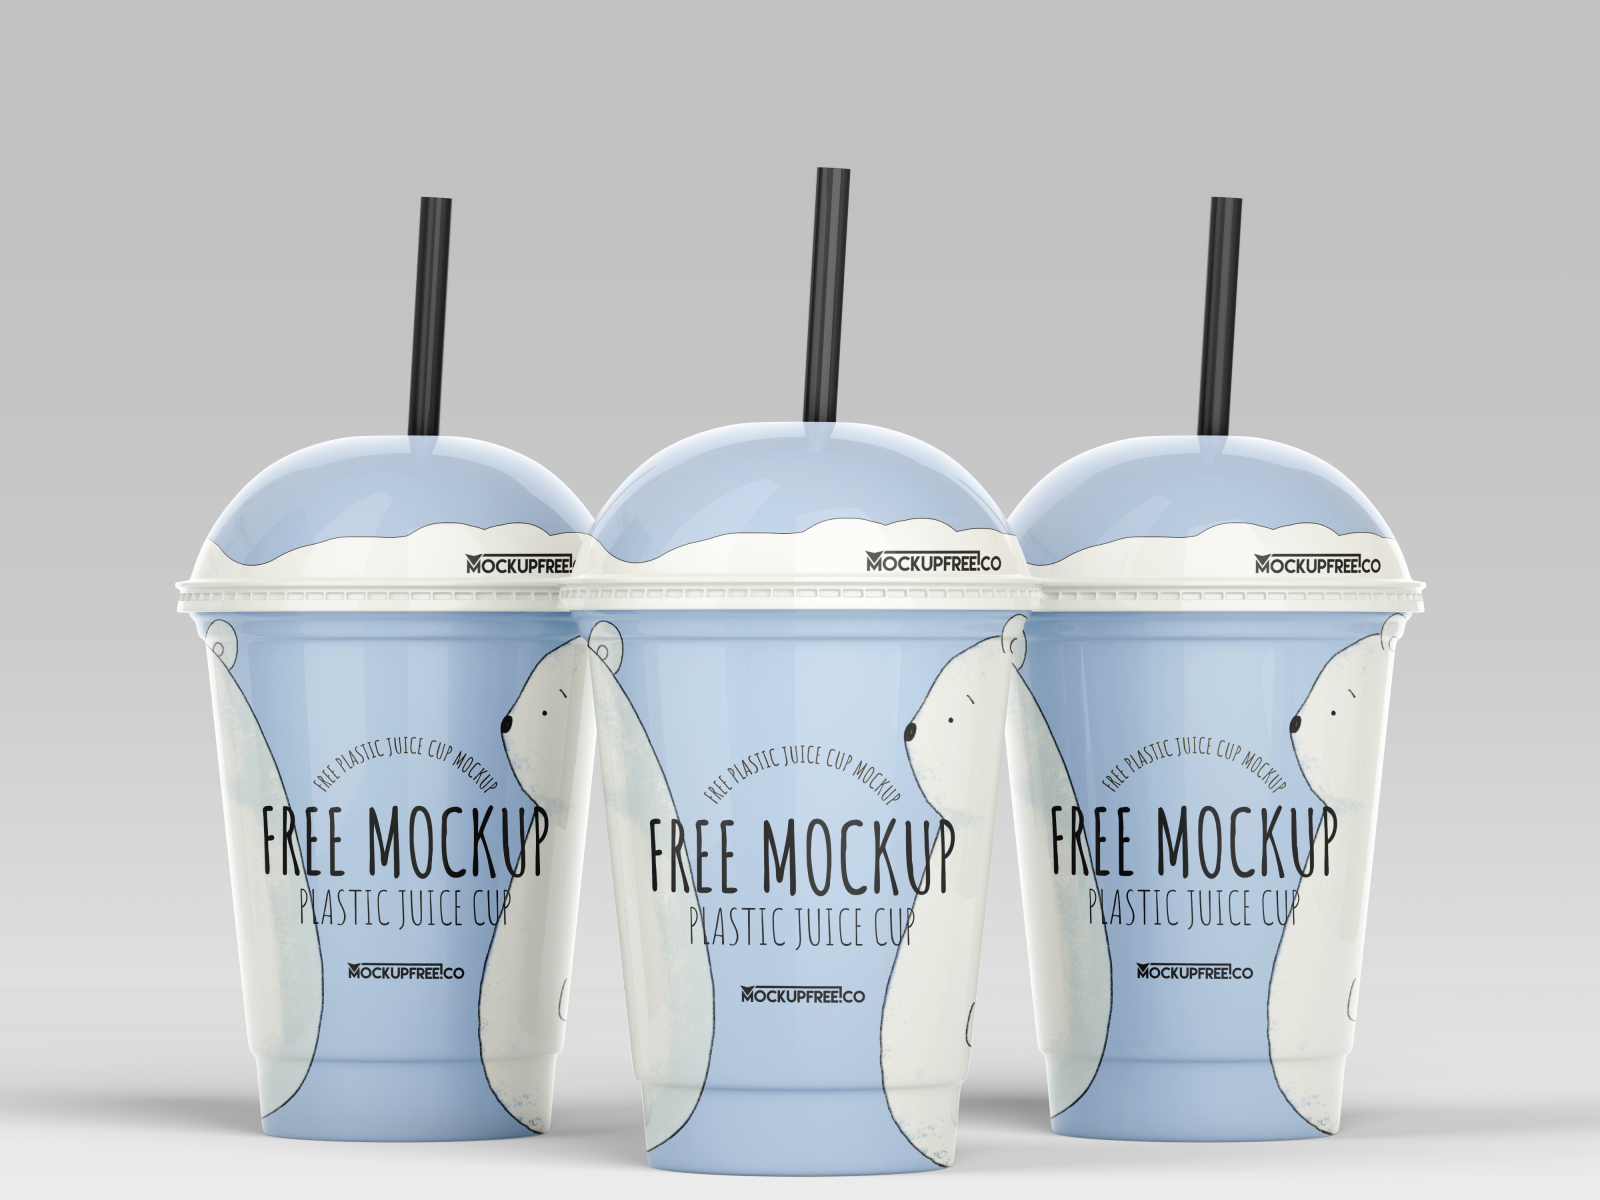 Download Free Plastic Juice Cup Mockup Template By Mockupfree On Dribbble